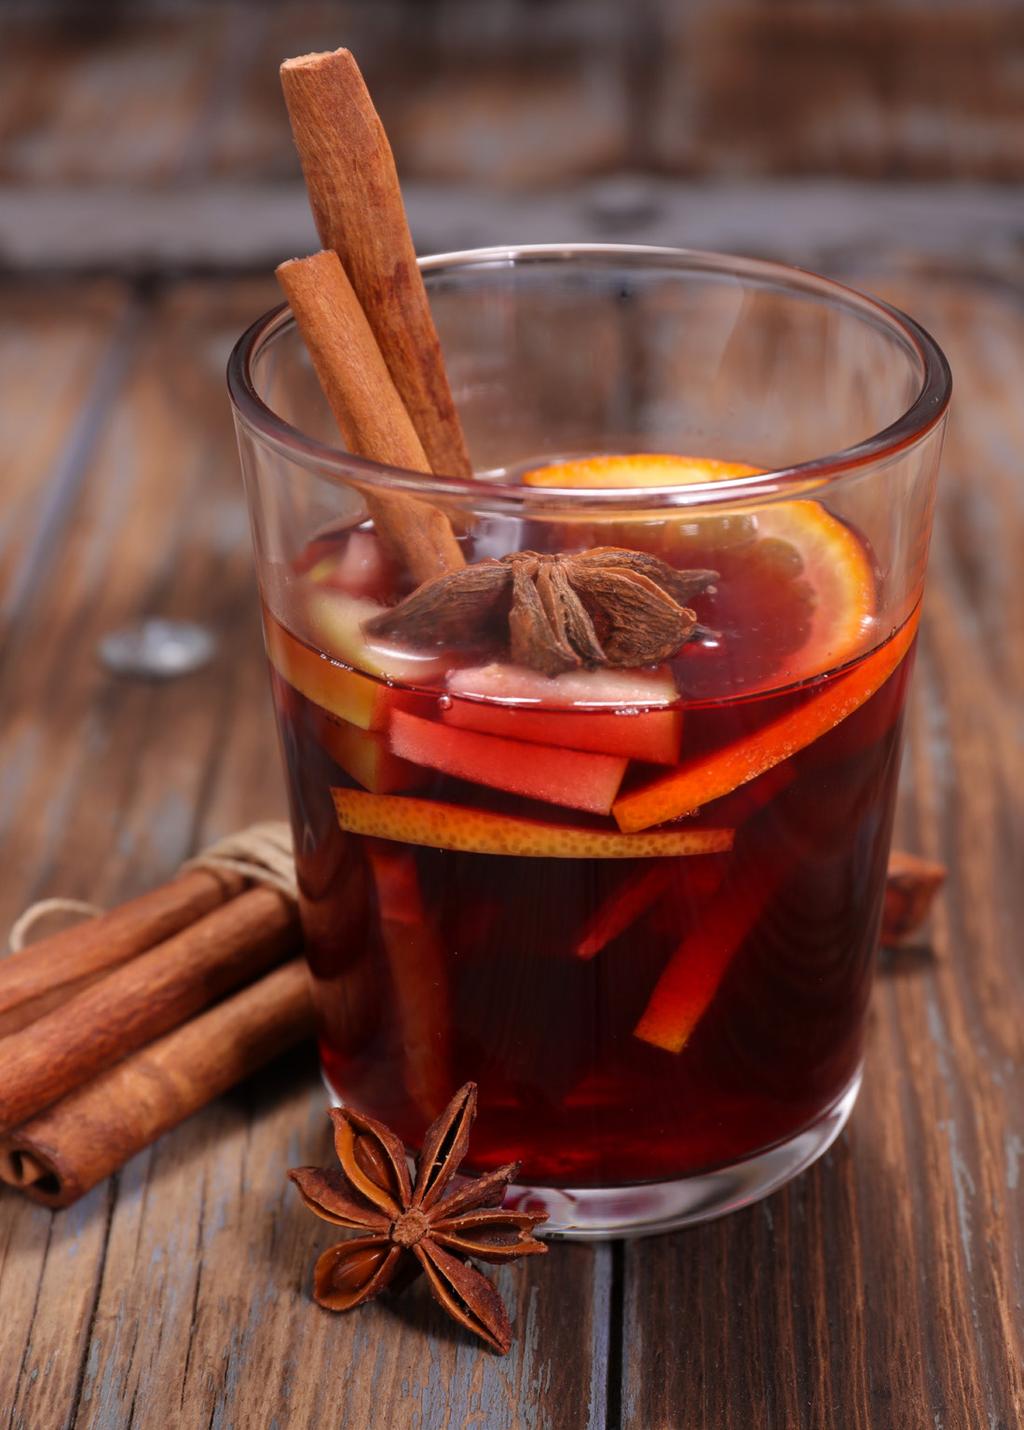 Non-alcoholic Mulled Wine Make mulled wine minus the booze with this fruity, alcohol-free recipe. Combining pomegranate juice, blackberries and spices, it s just as warming as the real deal.